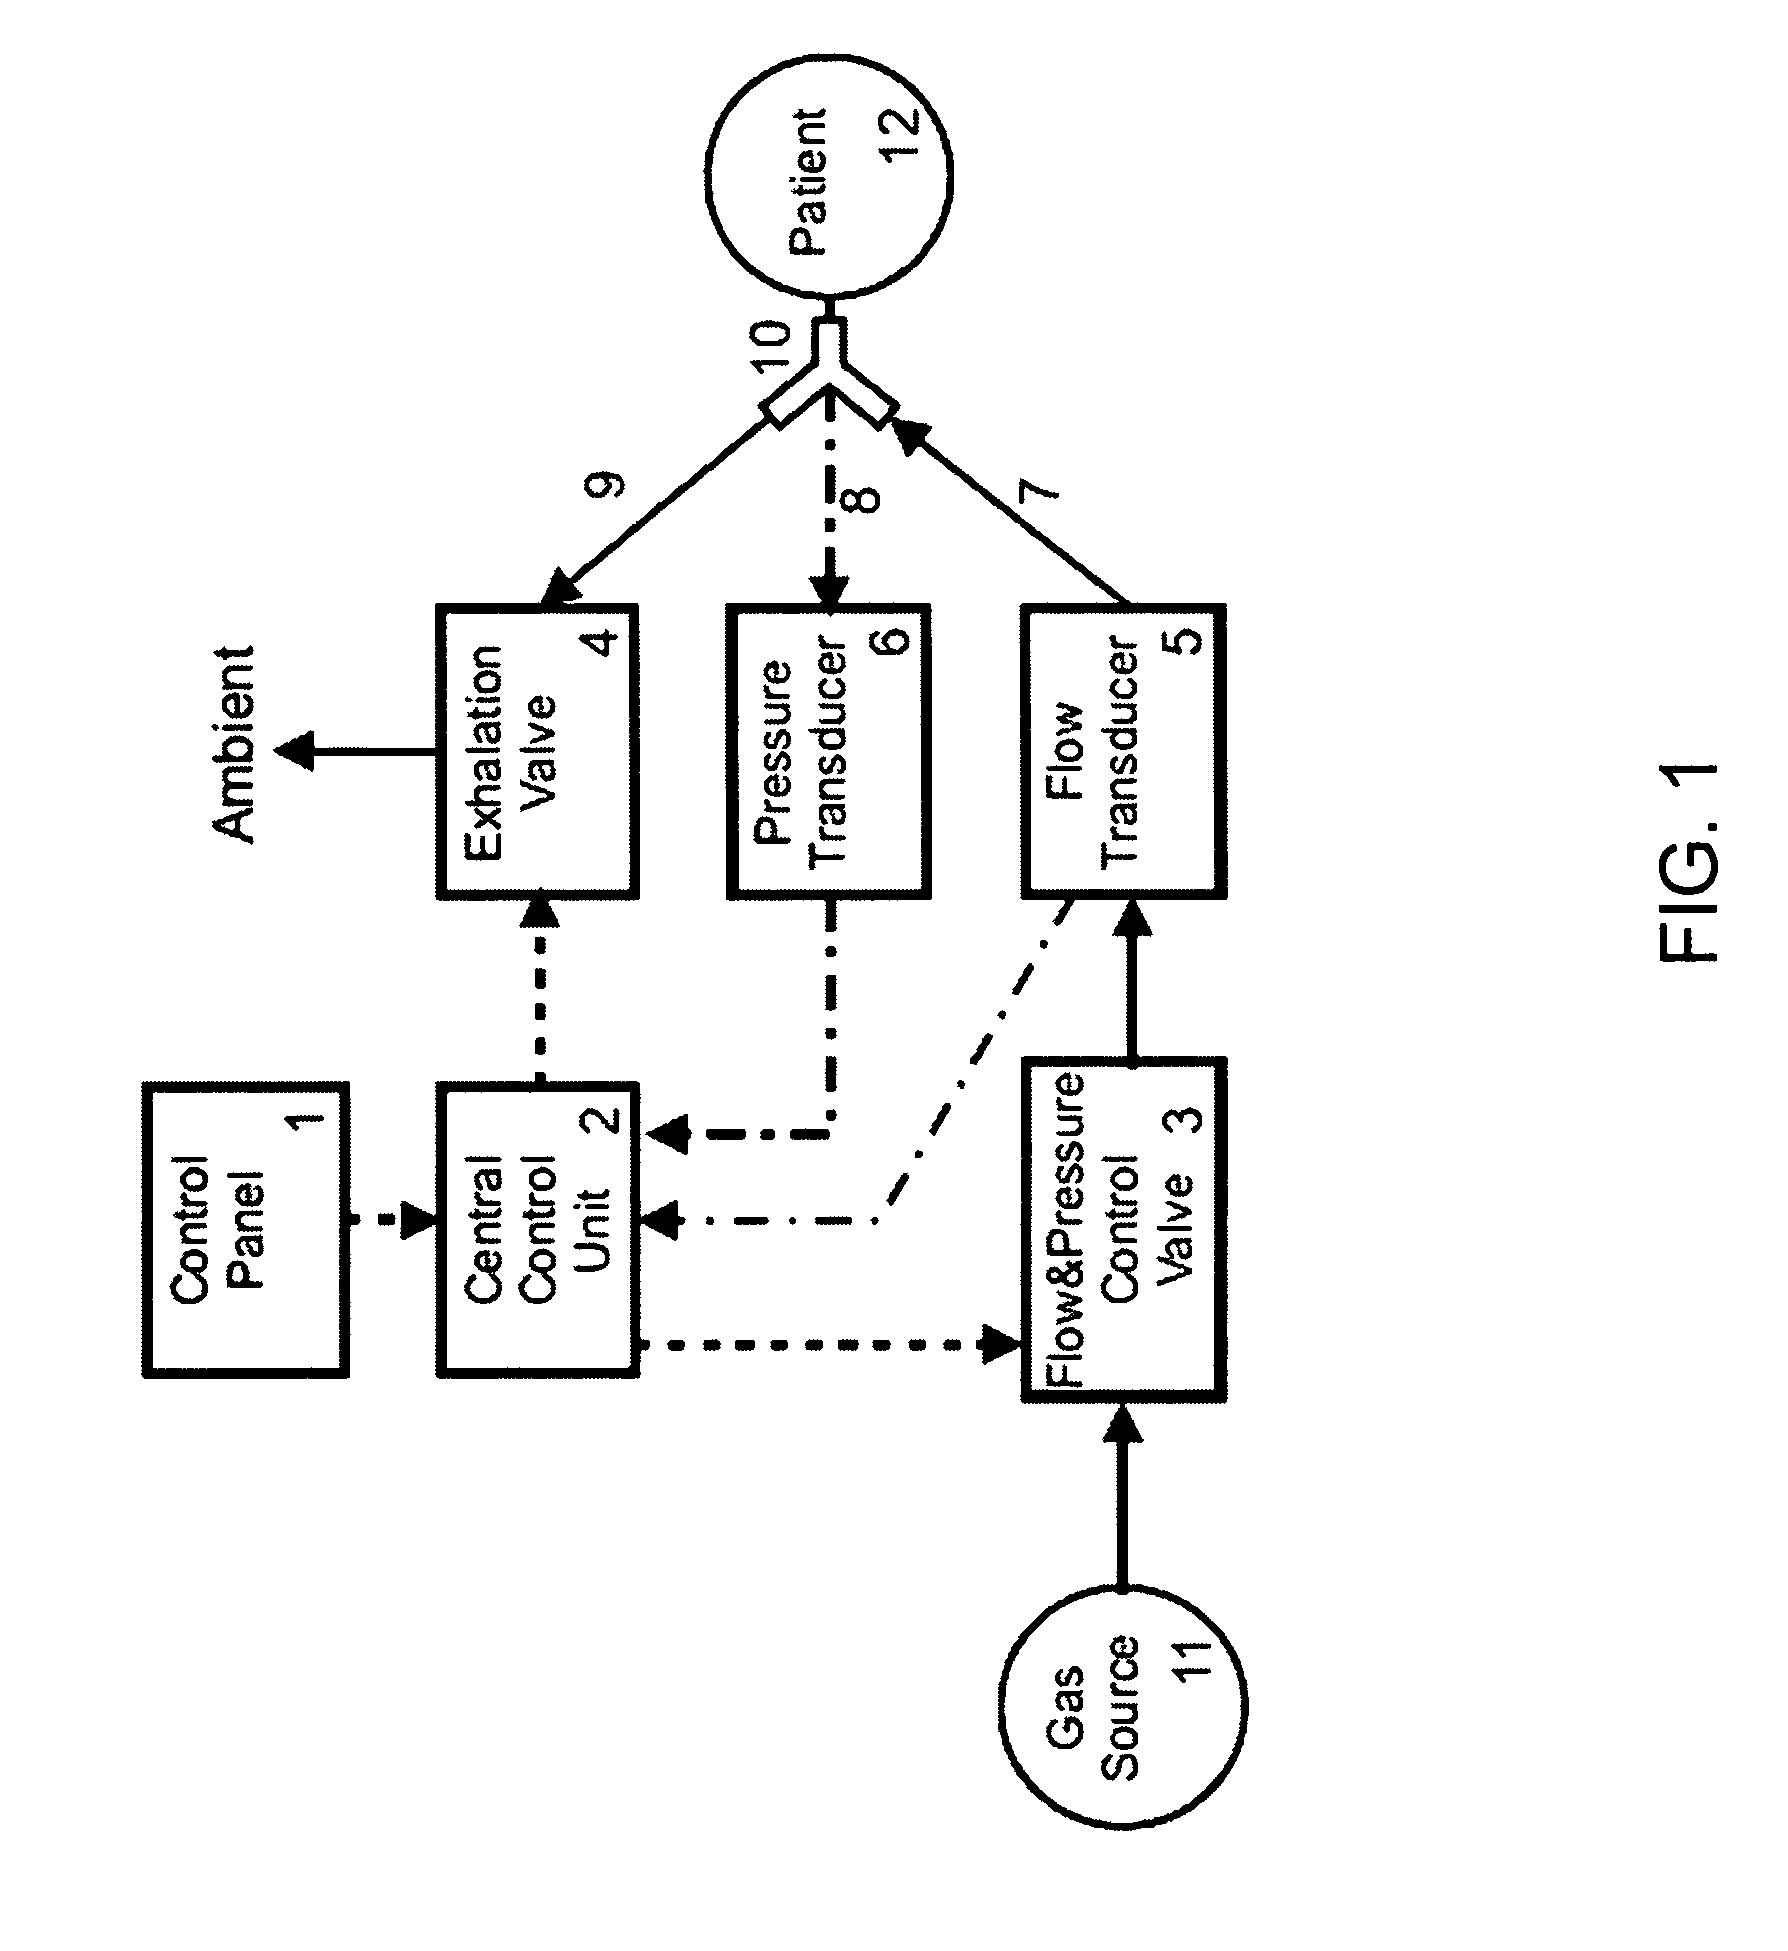 Method and system to control mechanical lung ventilation